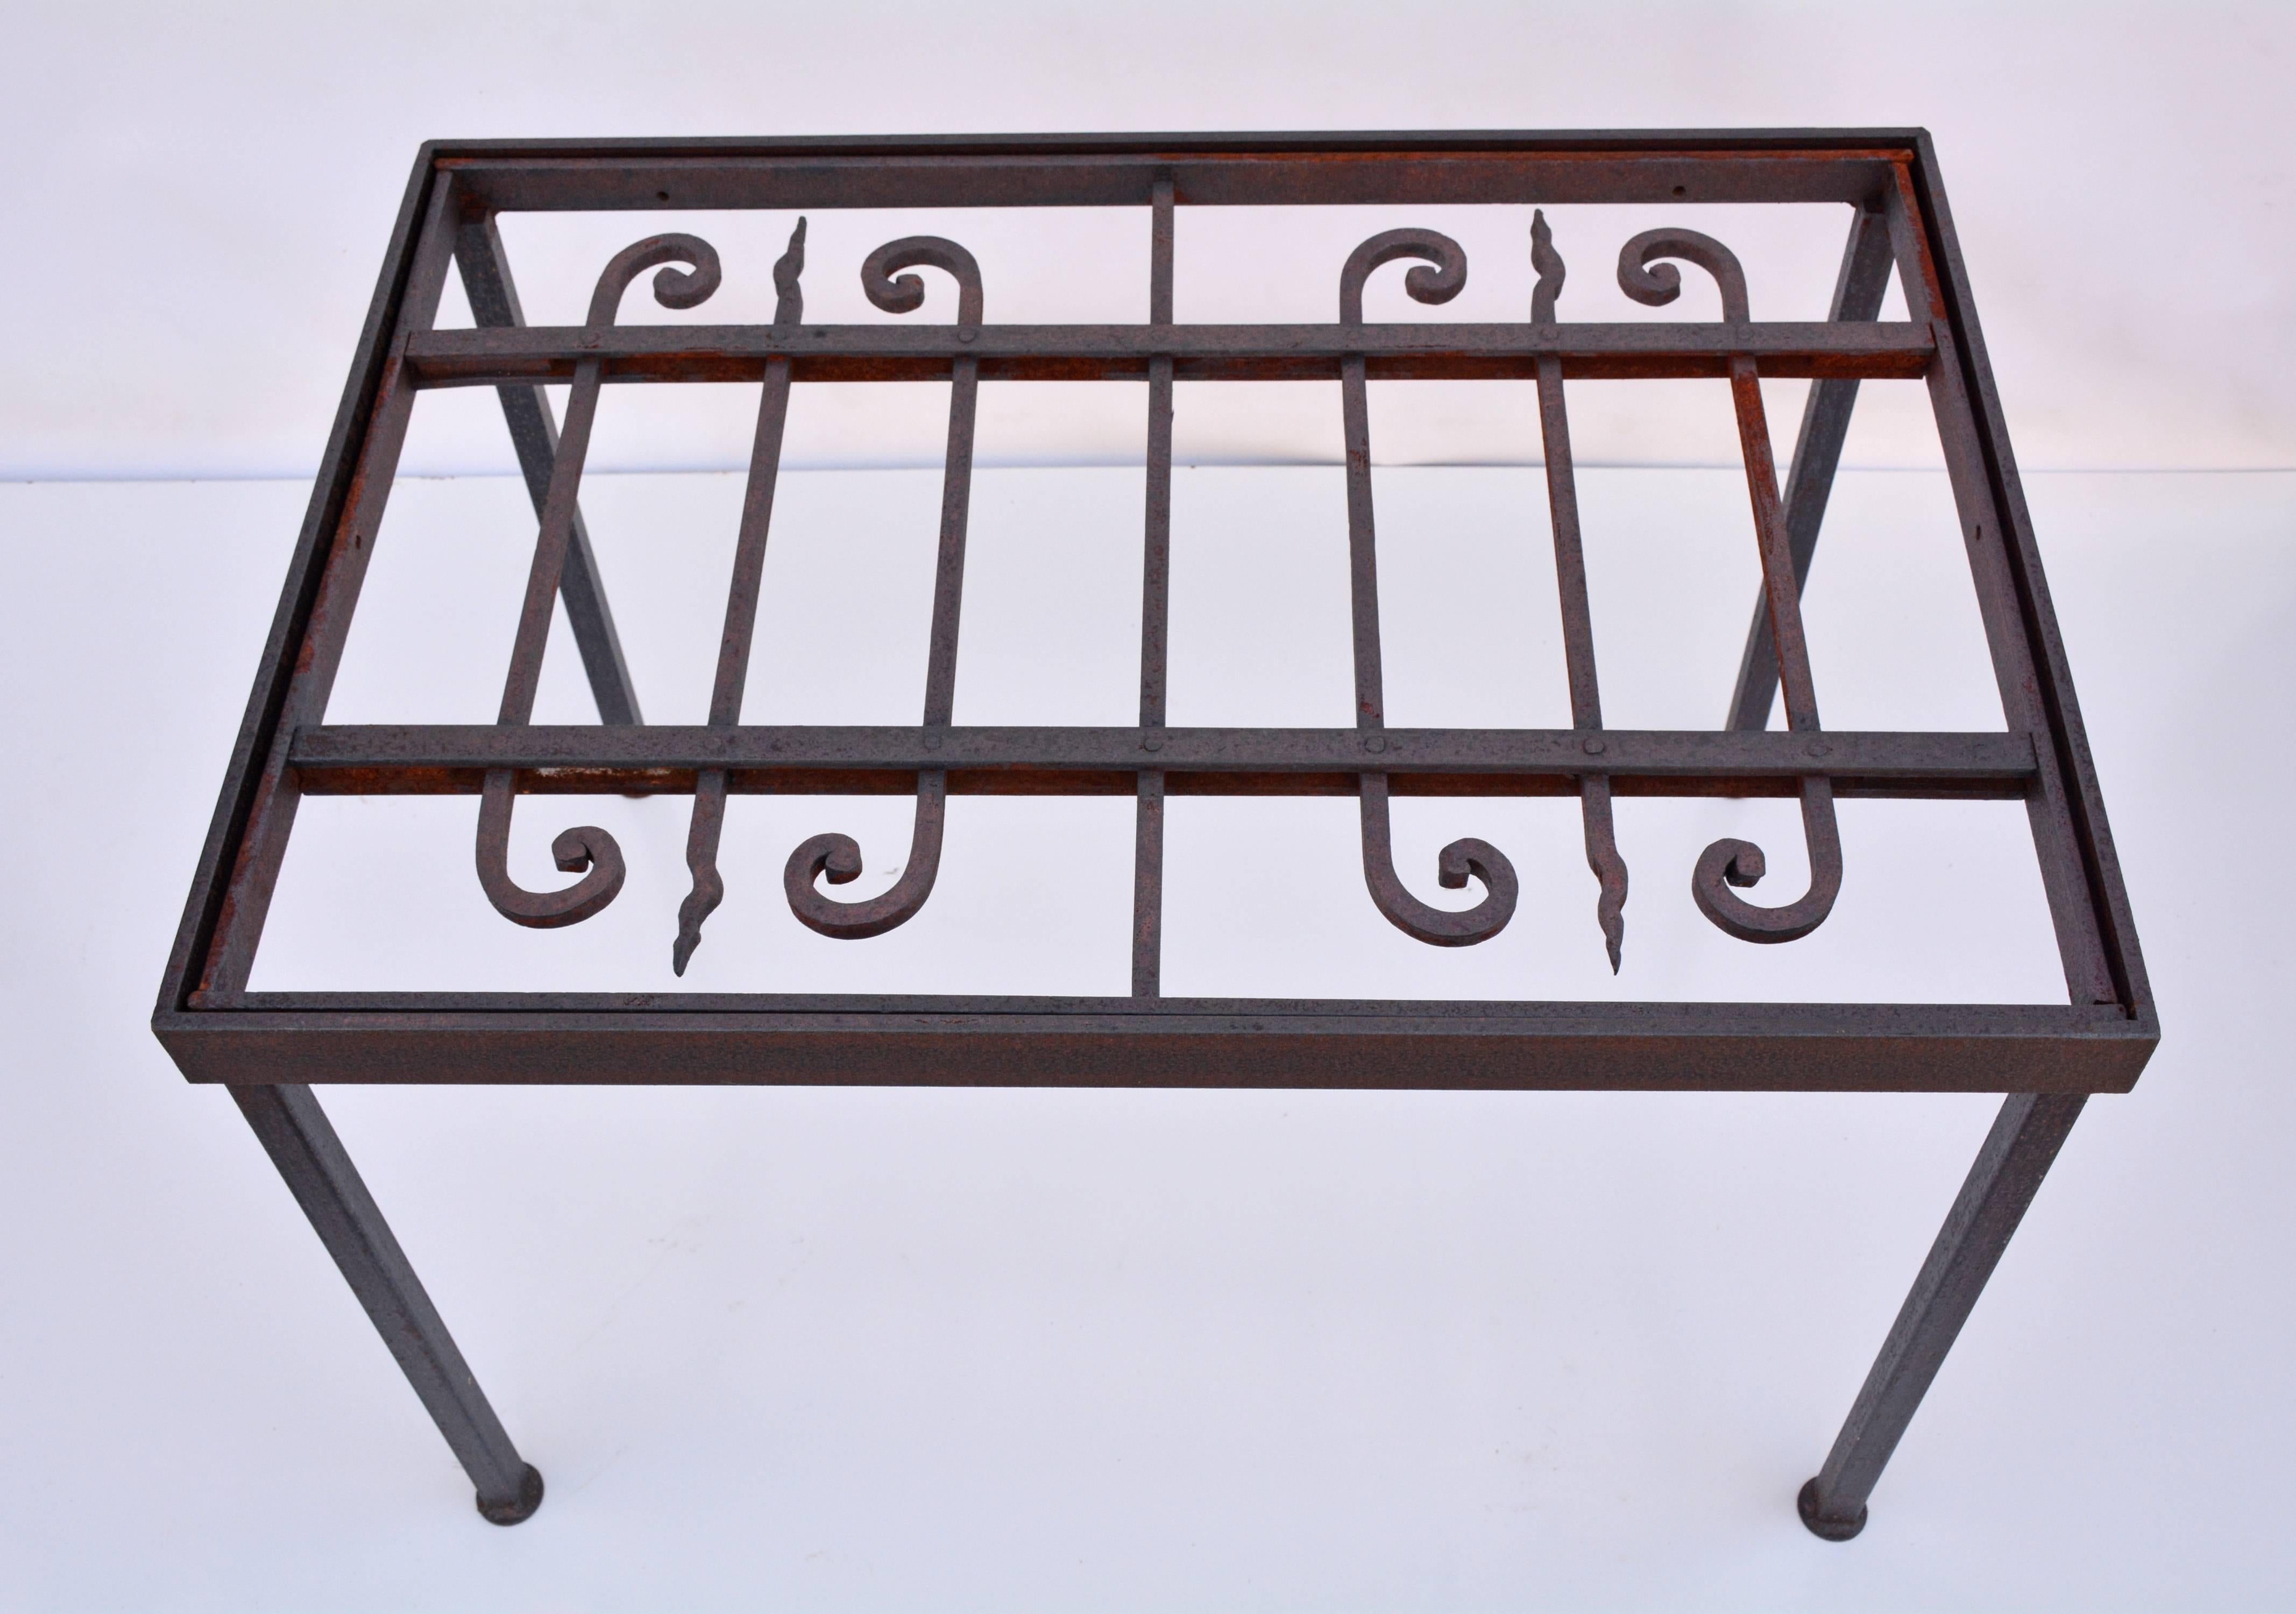 Framed patterned grillwork top sits down within the table frame. A required glass top can then be set on top of the grillwork. Can be used as side table, end table or coffee table.